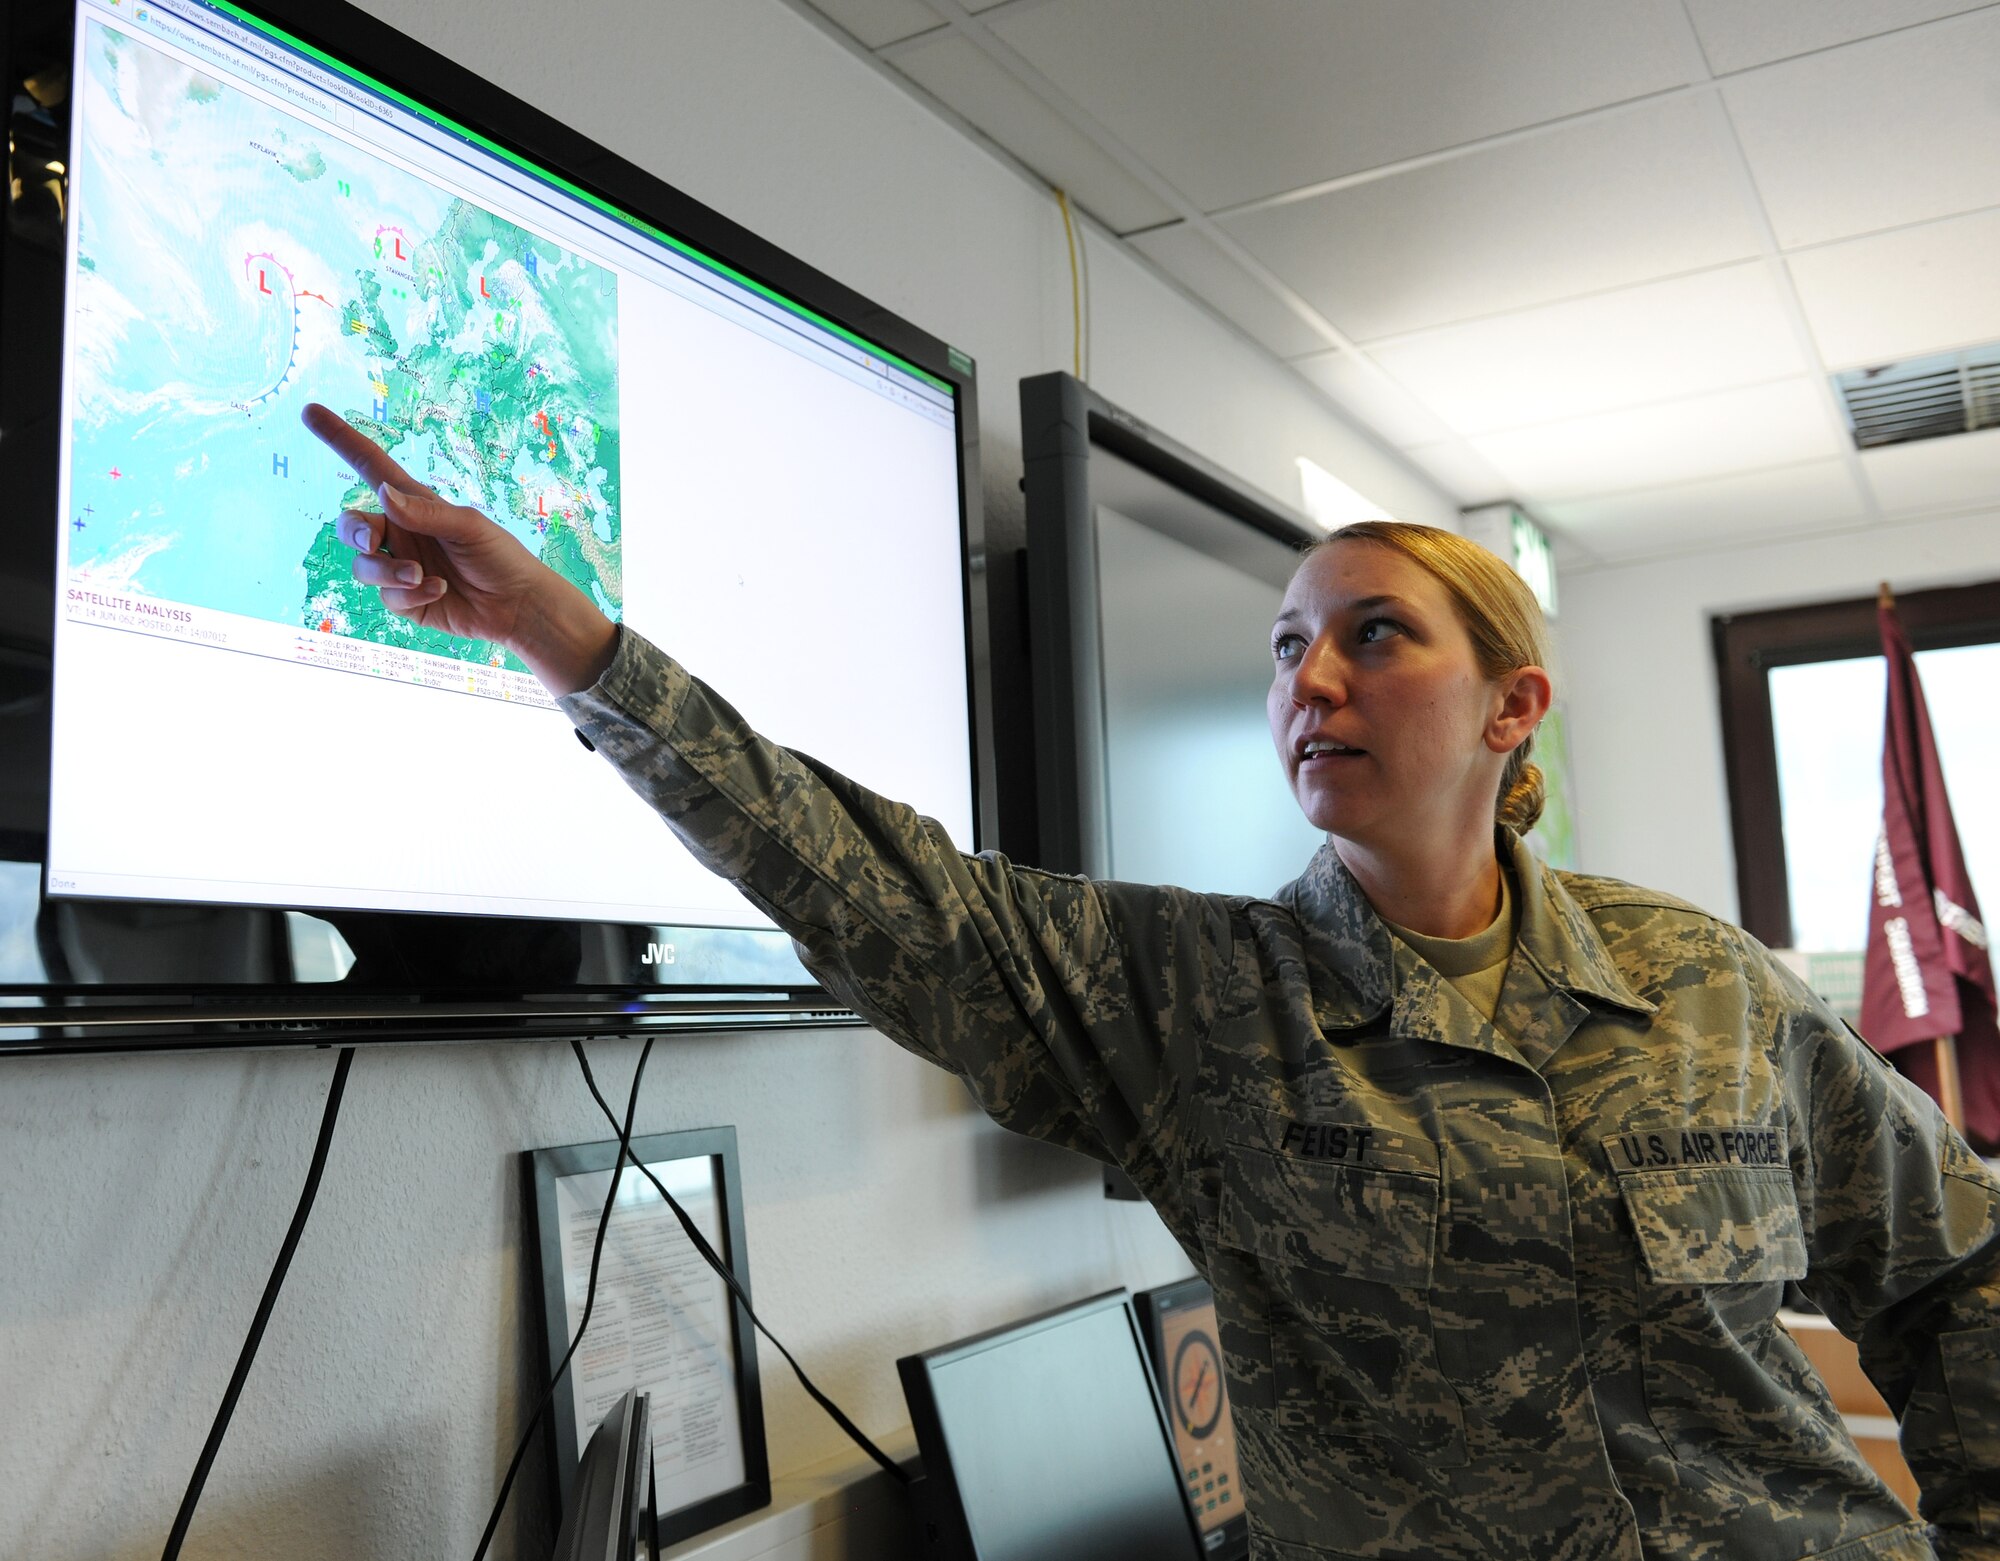 SPANGDAHLEM AIR BASE, Germany – Staff Sgt. Gayle Feist, 52nd Operations Support Squadron weather technician, points out possible weather fluctuations that may affect operations here June 14. The 52nd OSS Weather Flight prepares weather forecasts that are used by fighter squadrons and other base agencies. (U.S. Air Force photo/Senior Airman Nathanael Callon)